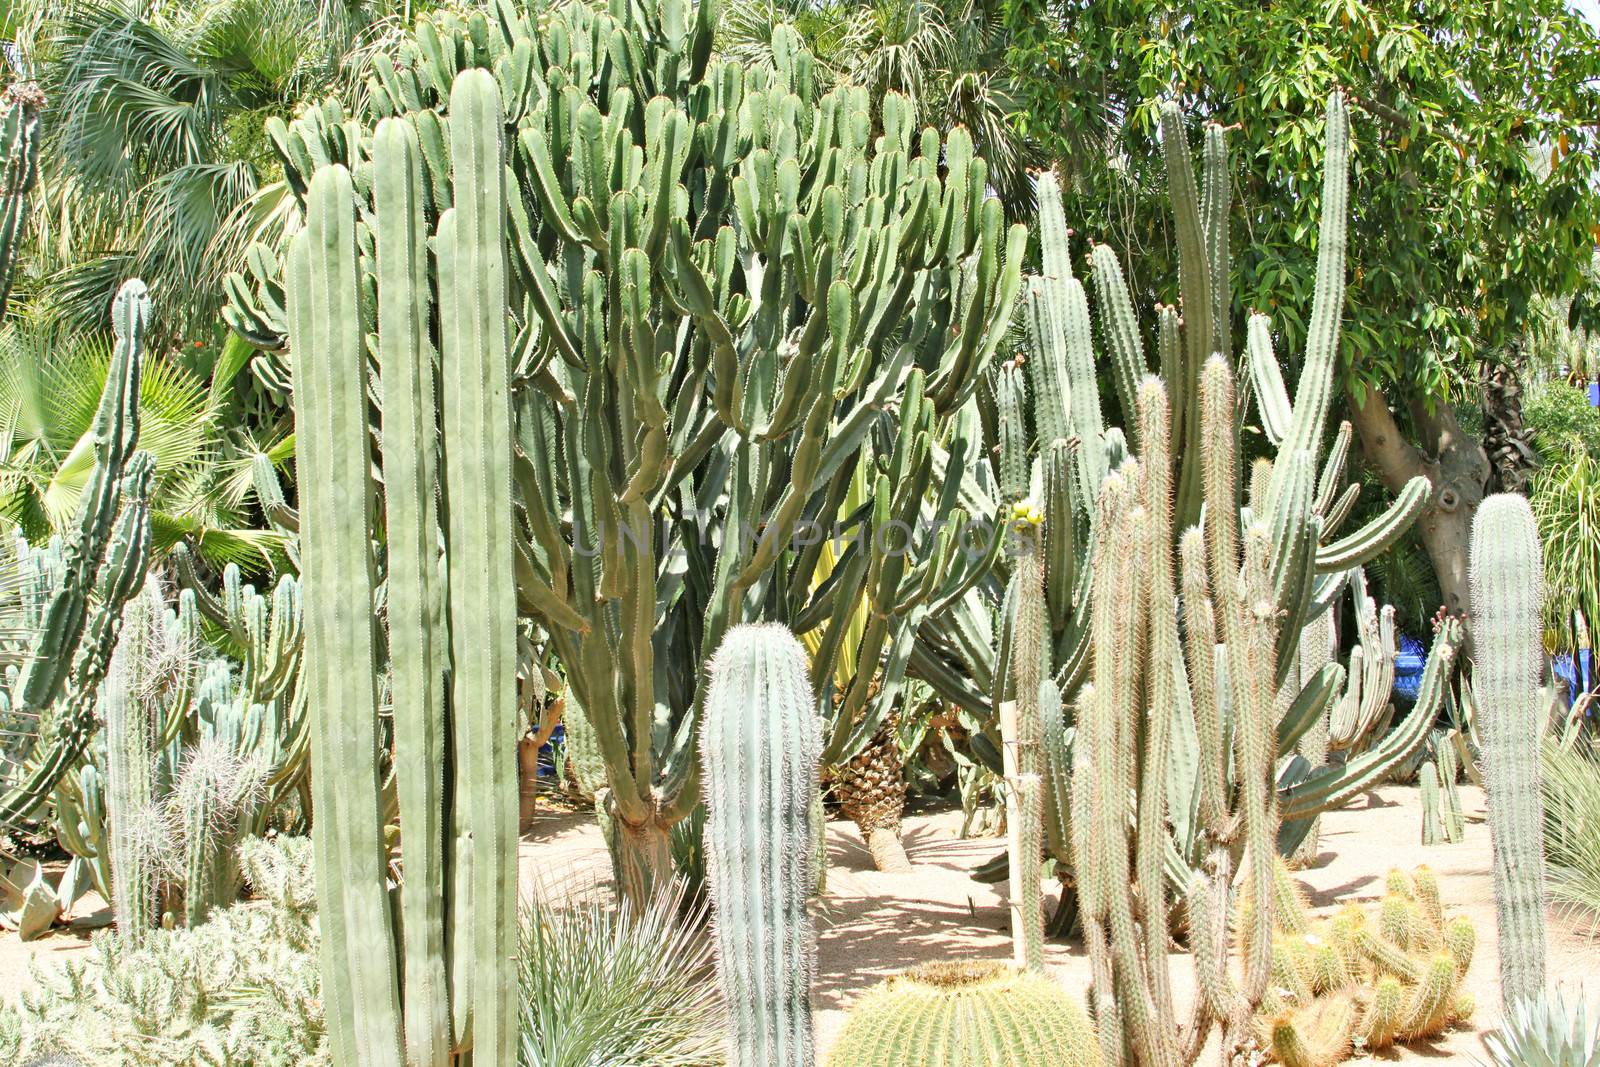 Many various green exotic cactuses of different size
